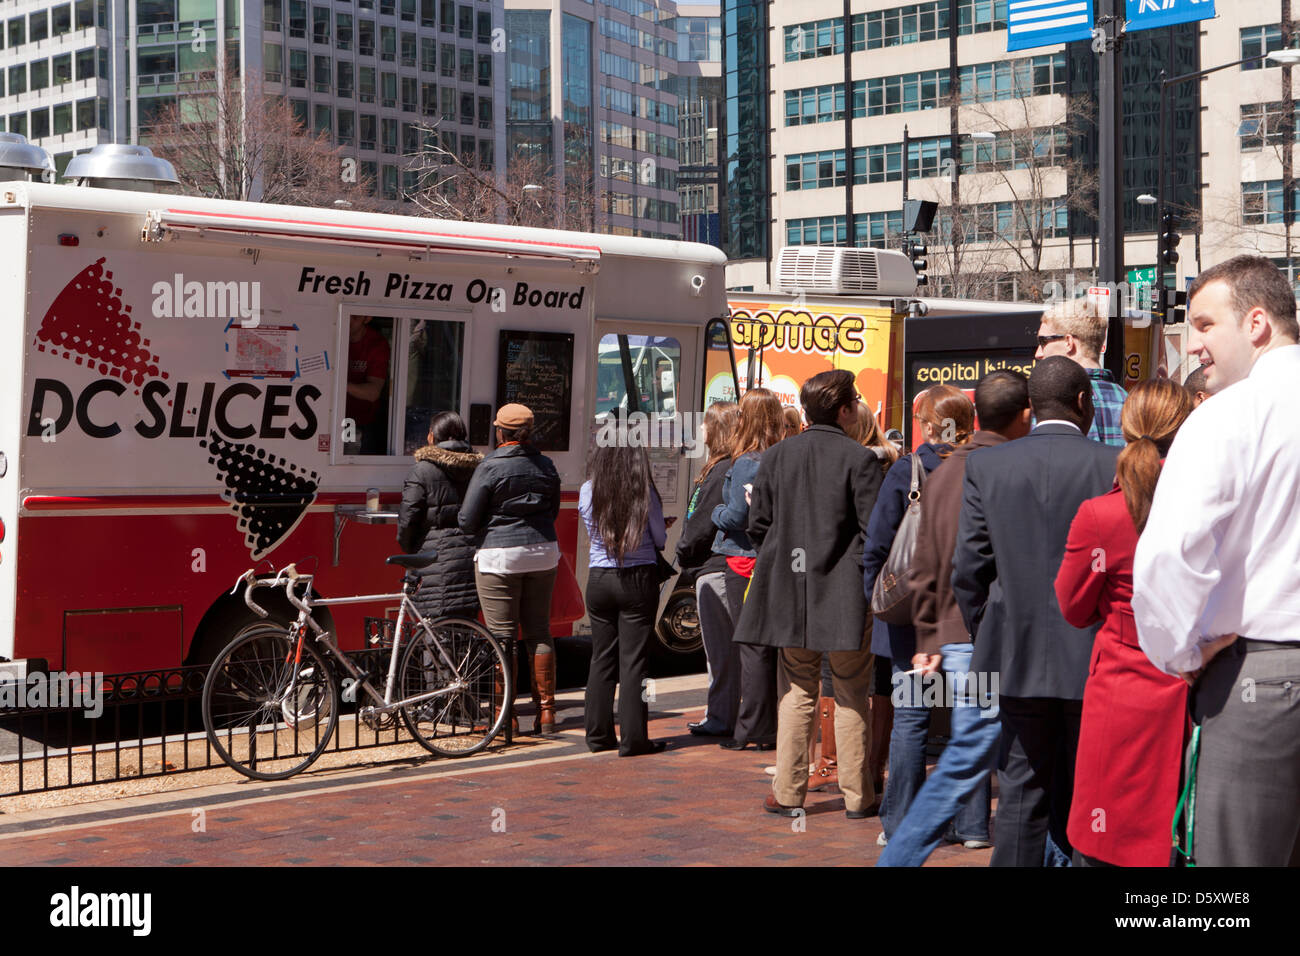 People in queue at a Pizza food truck - USA Stock Photo